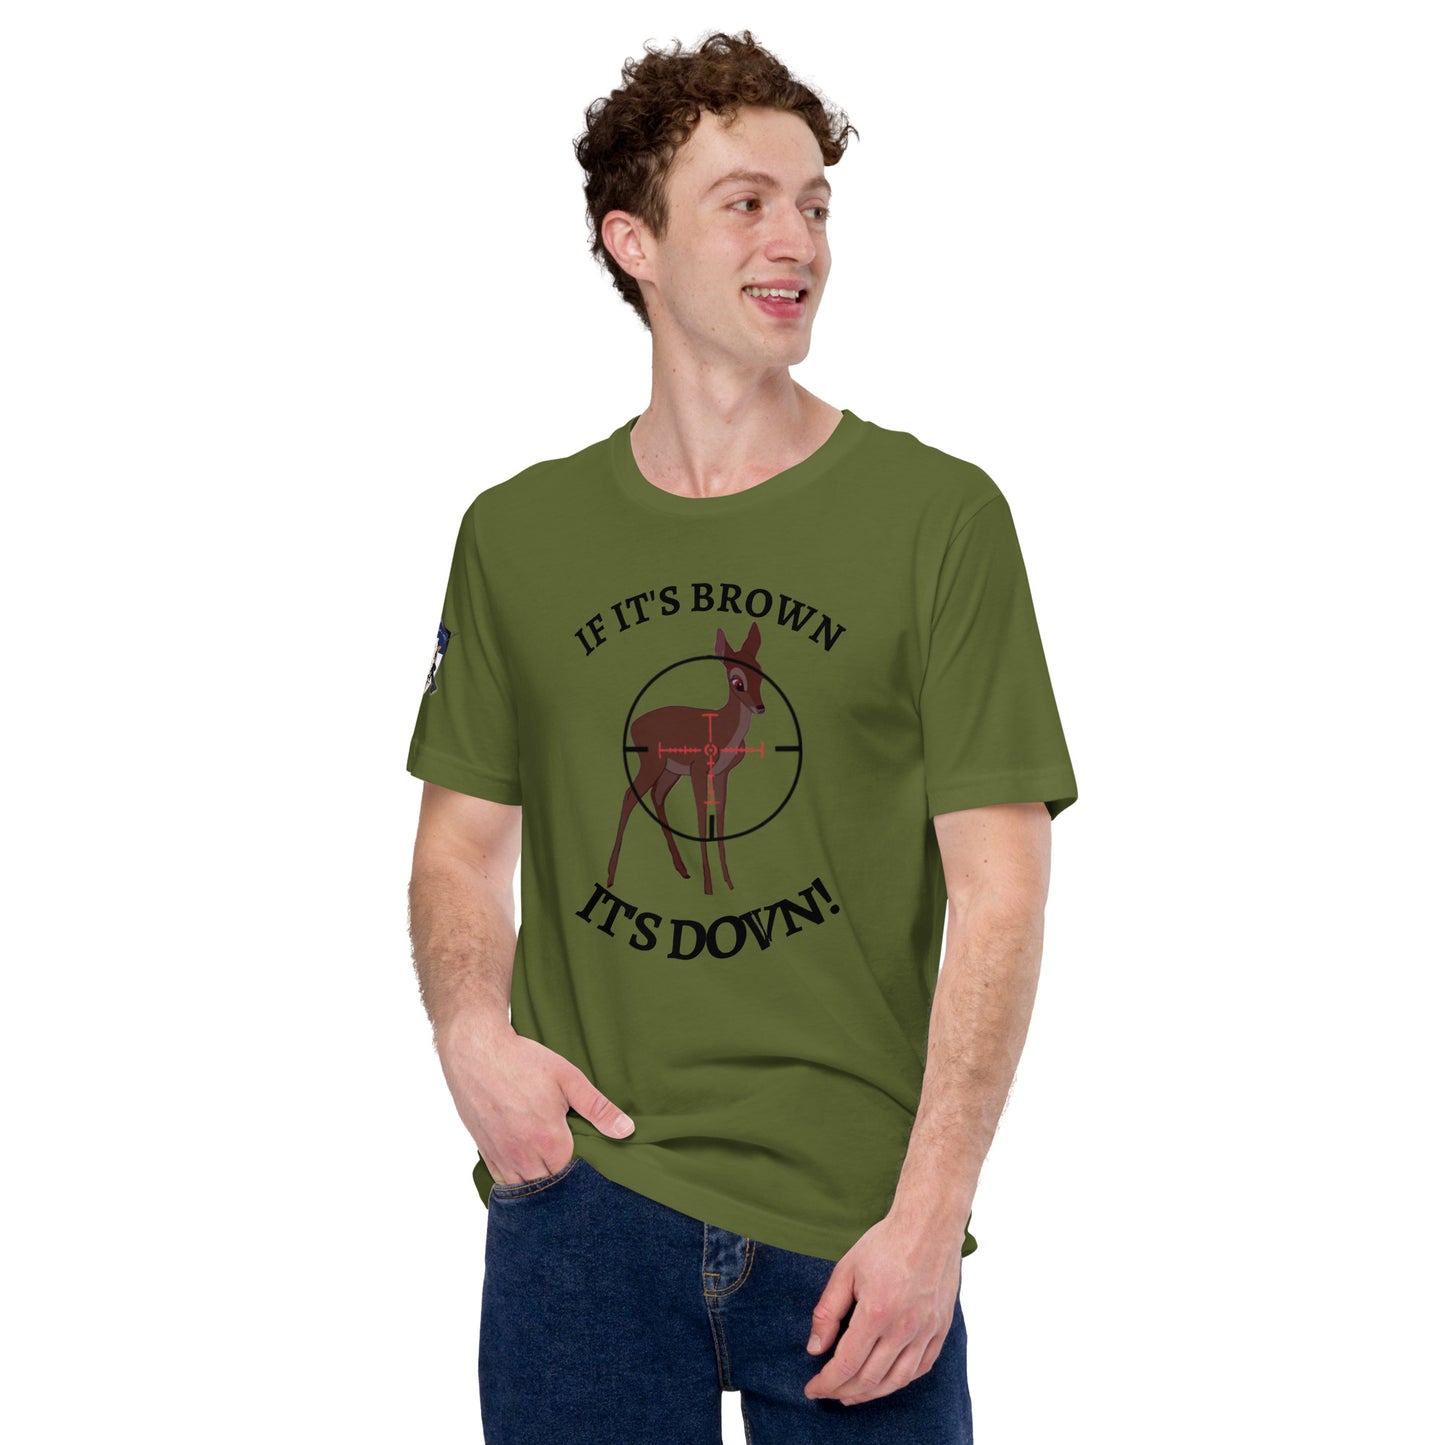 If it's brown, it's DOWN! t-shirt